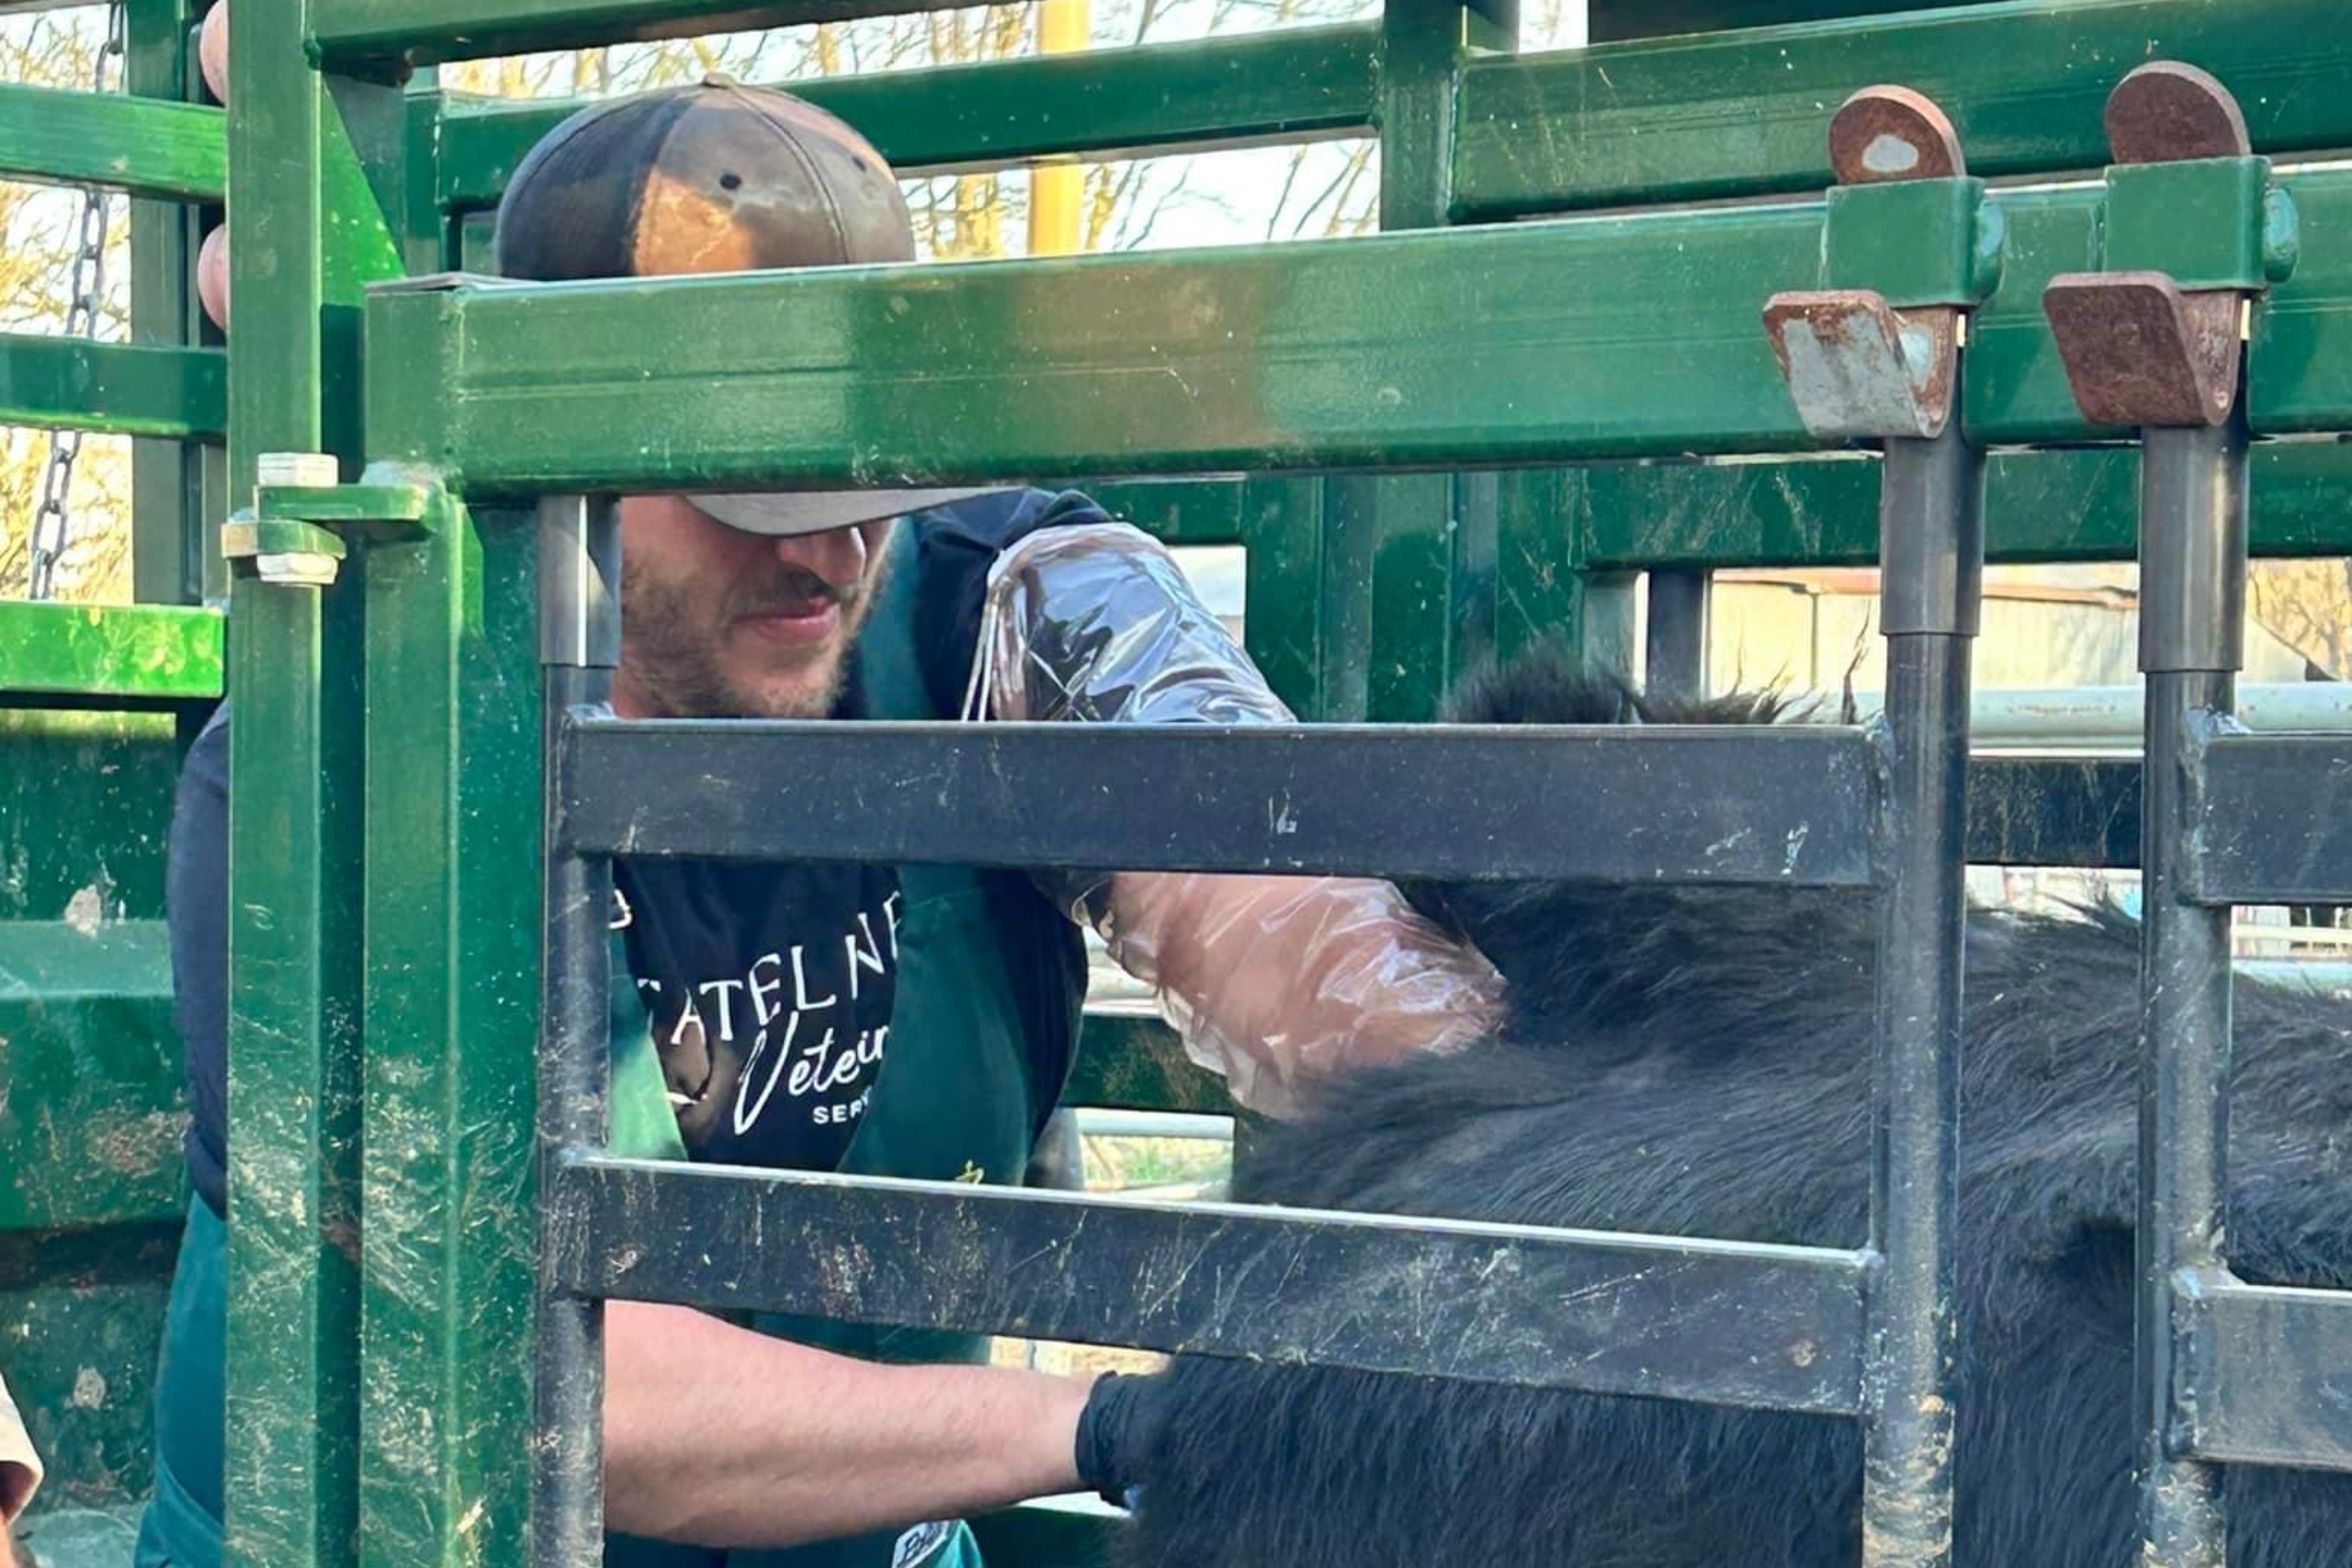 A man in a black shirt and baseball cap reaches through a hydraulic chute to gently interact with a cow.